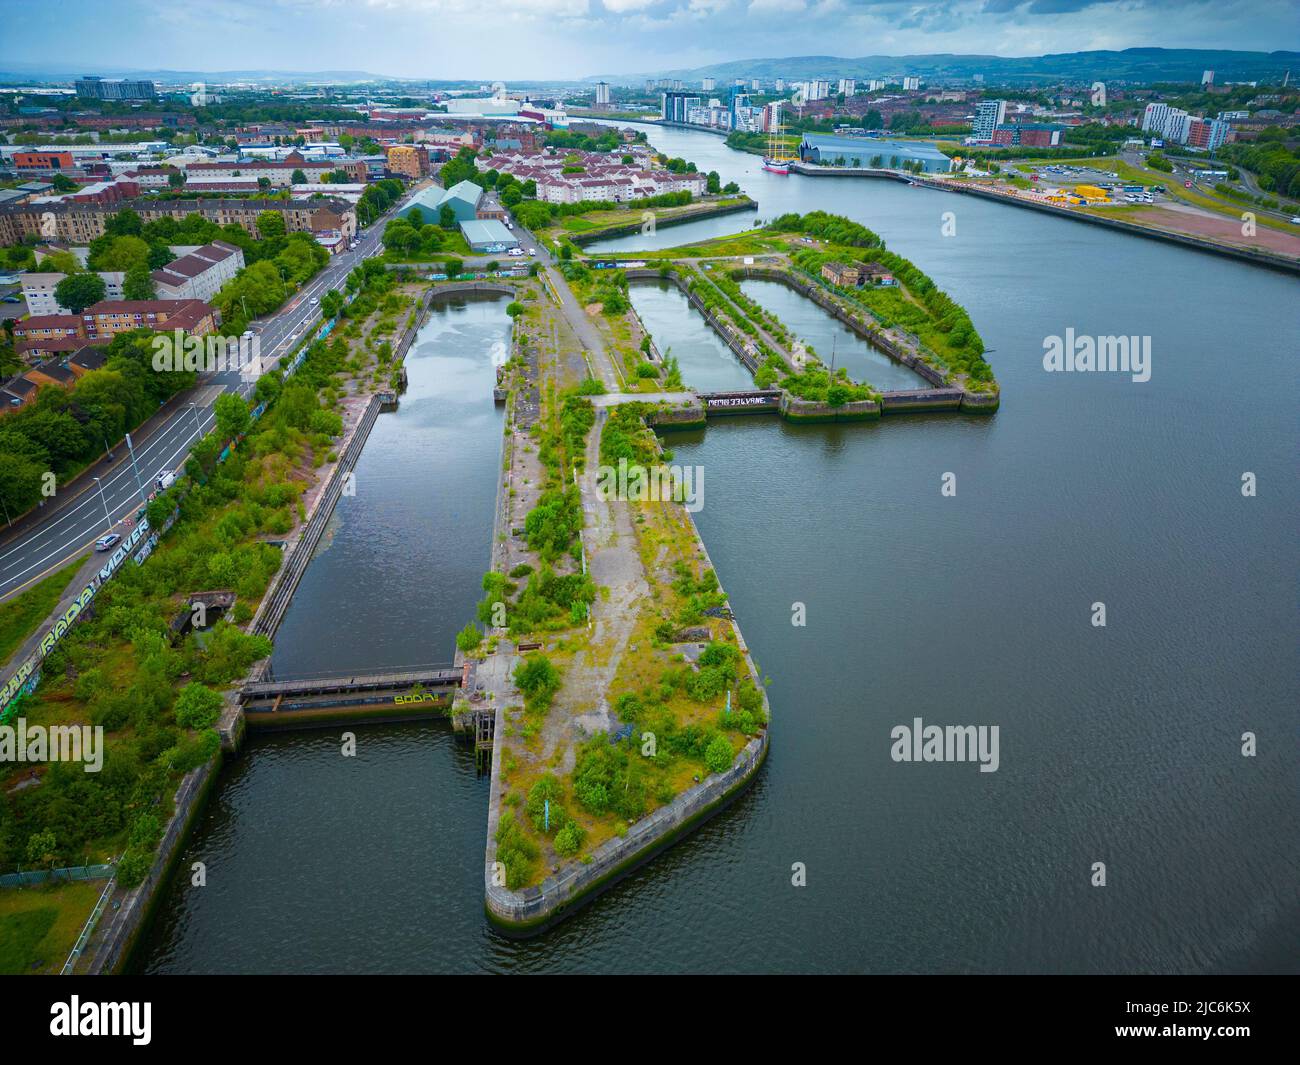 Aerial view of old disused former graving docks at Govan on the River Clyde in Glasgow, Scotland, UK Stock Photo